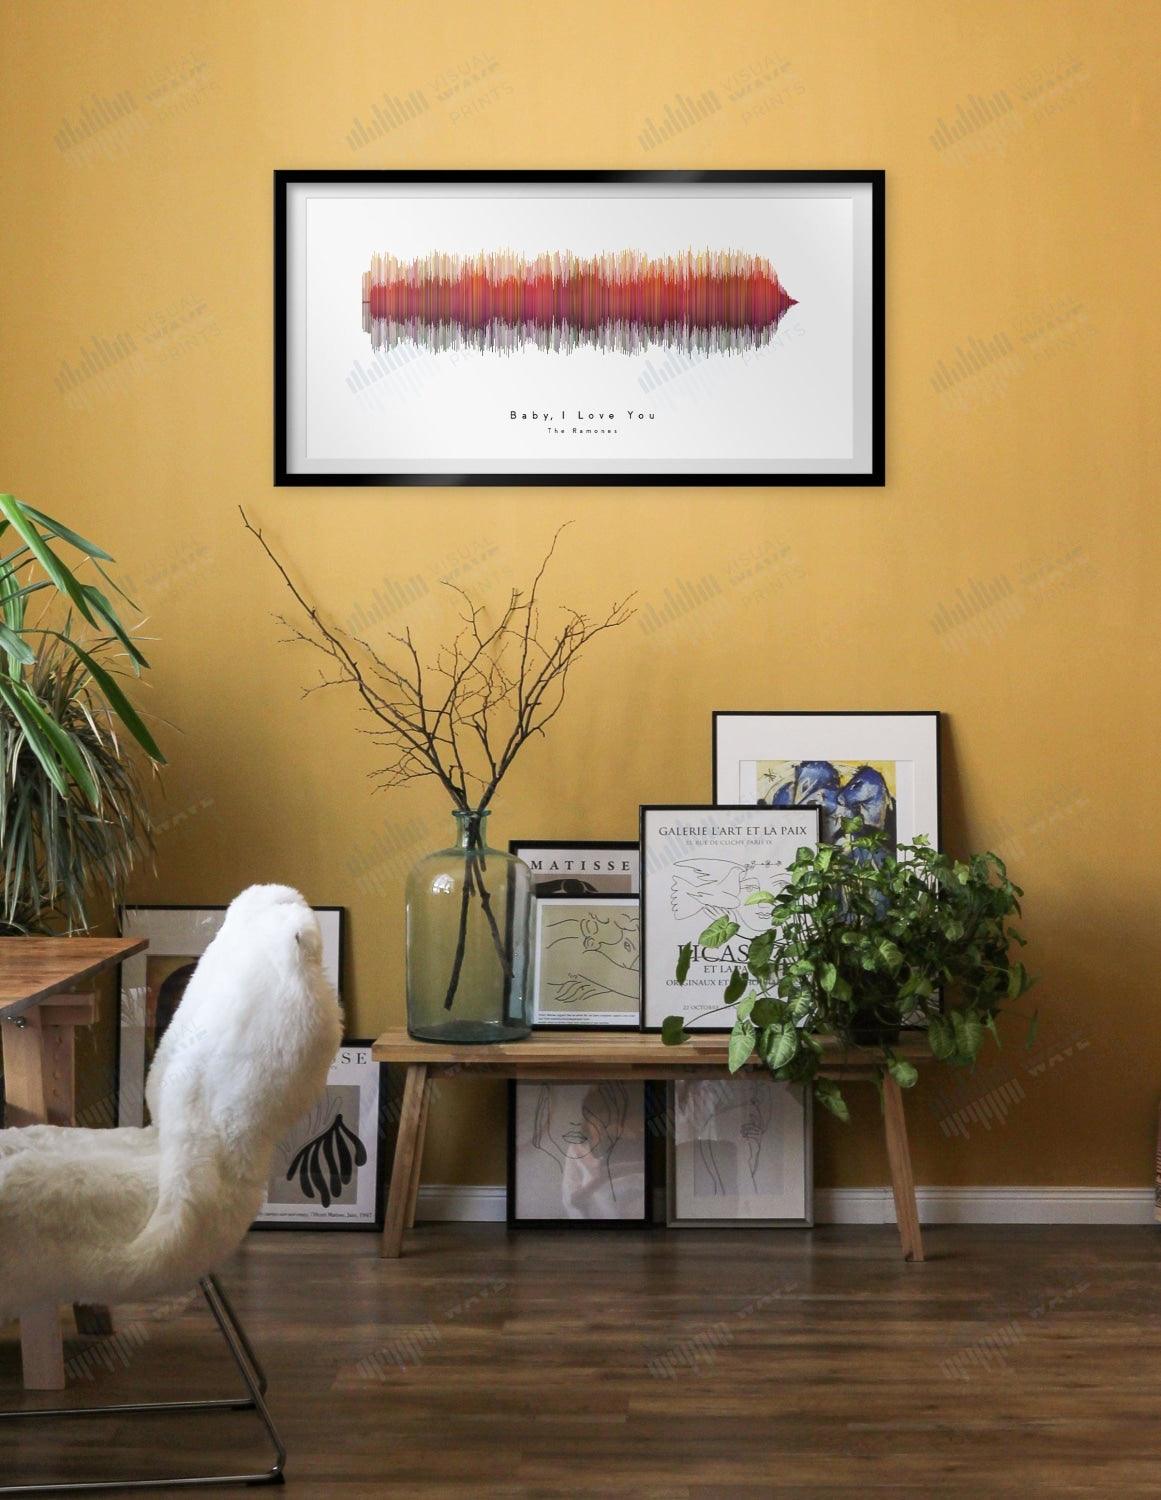 Baby, I Love You by The Ramones - Visual Wave Prints